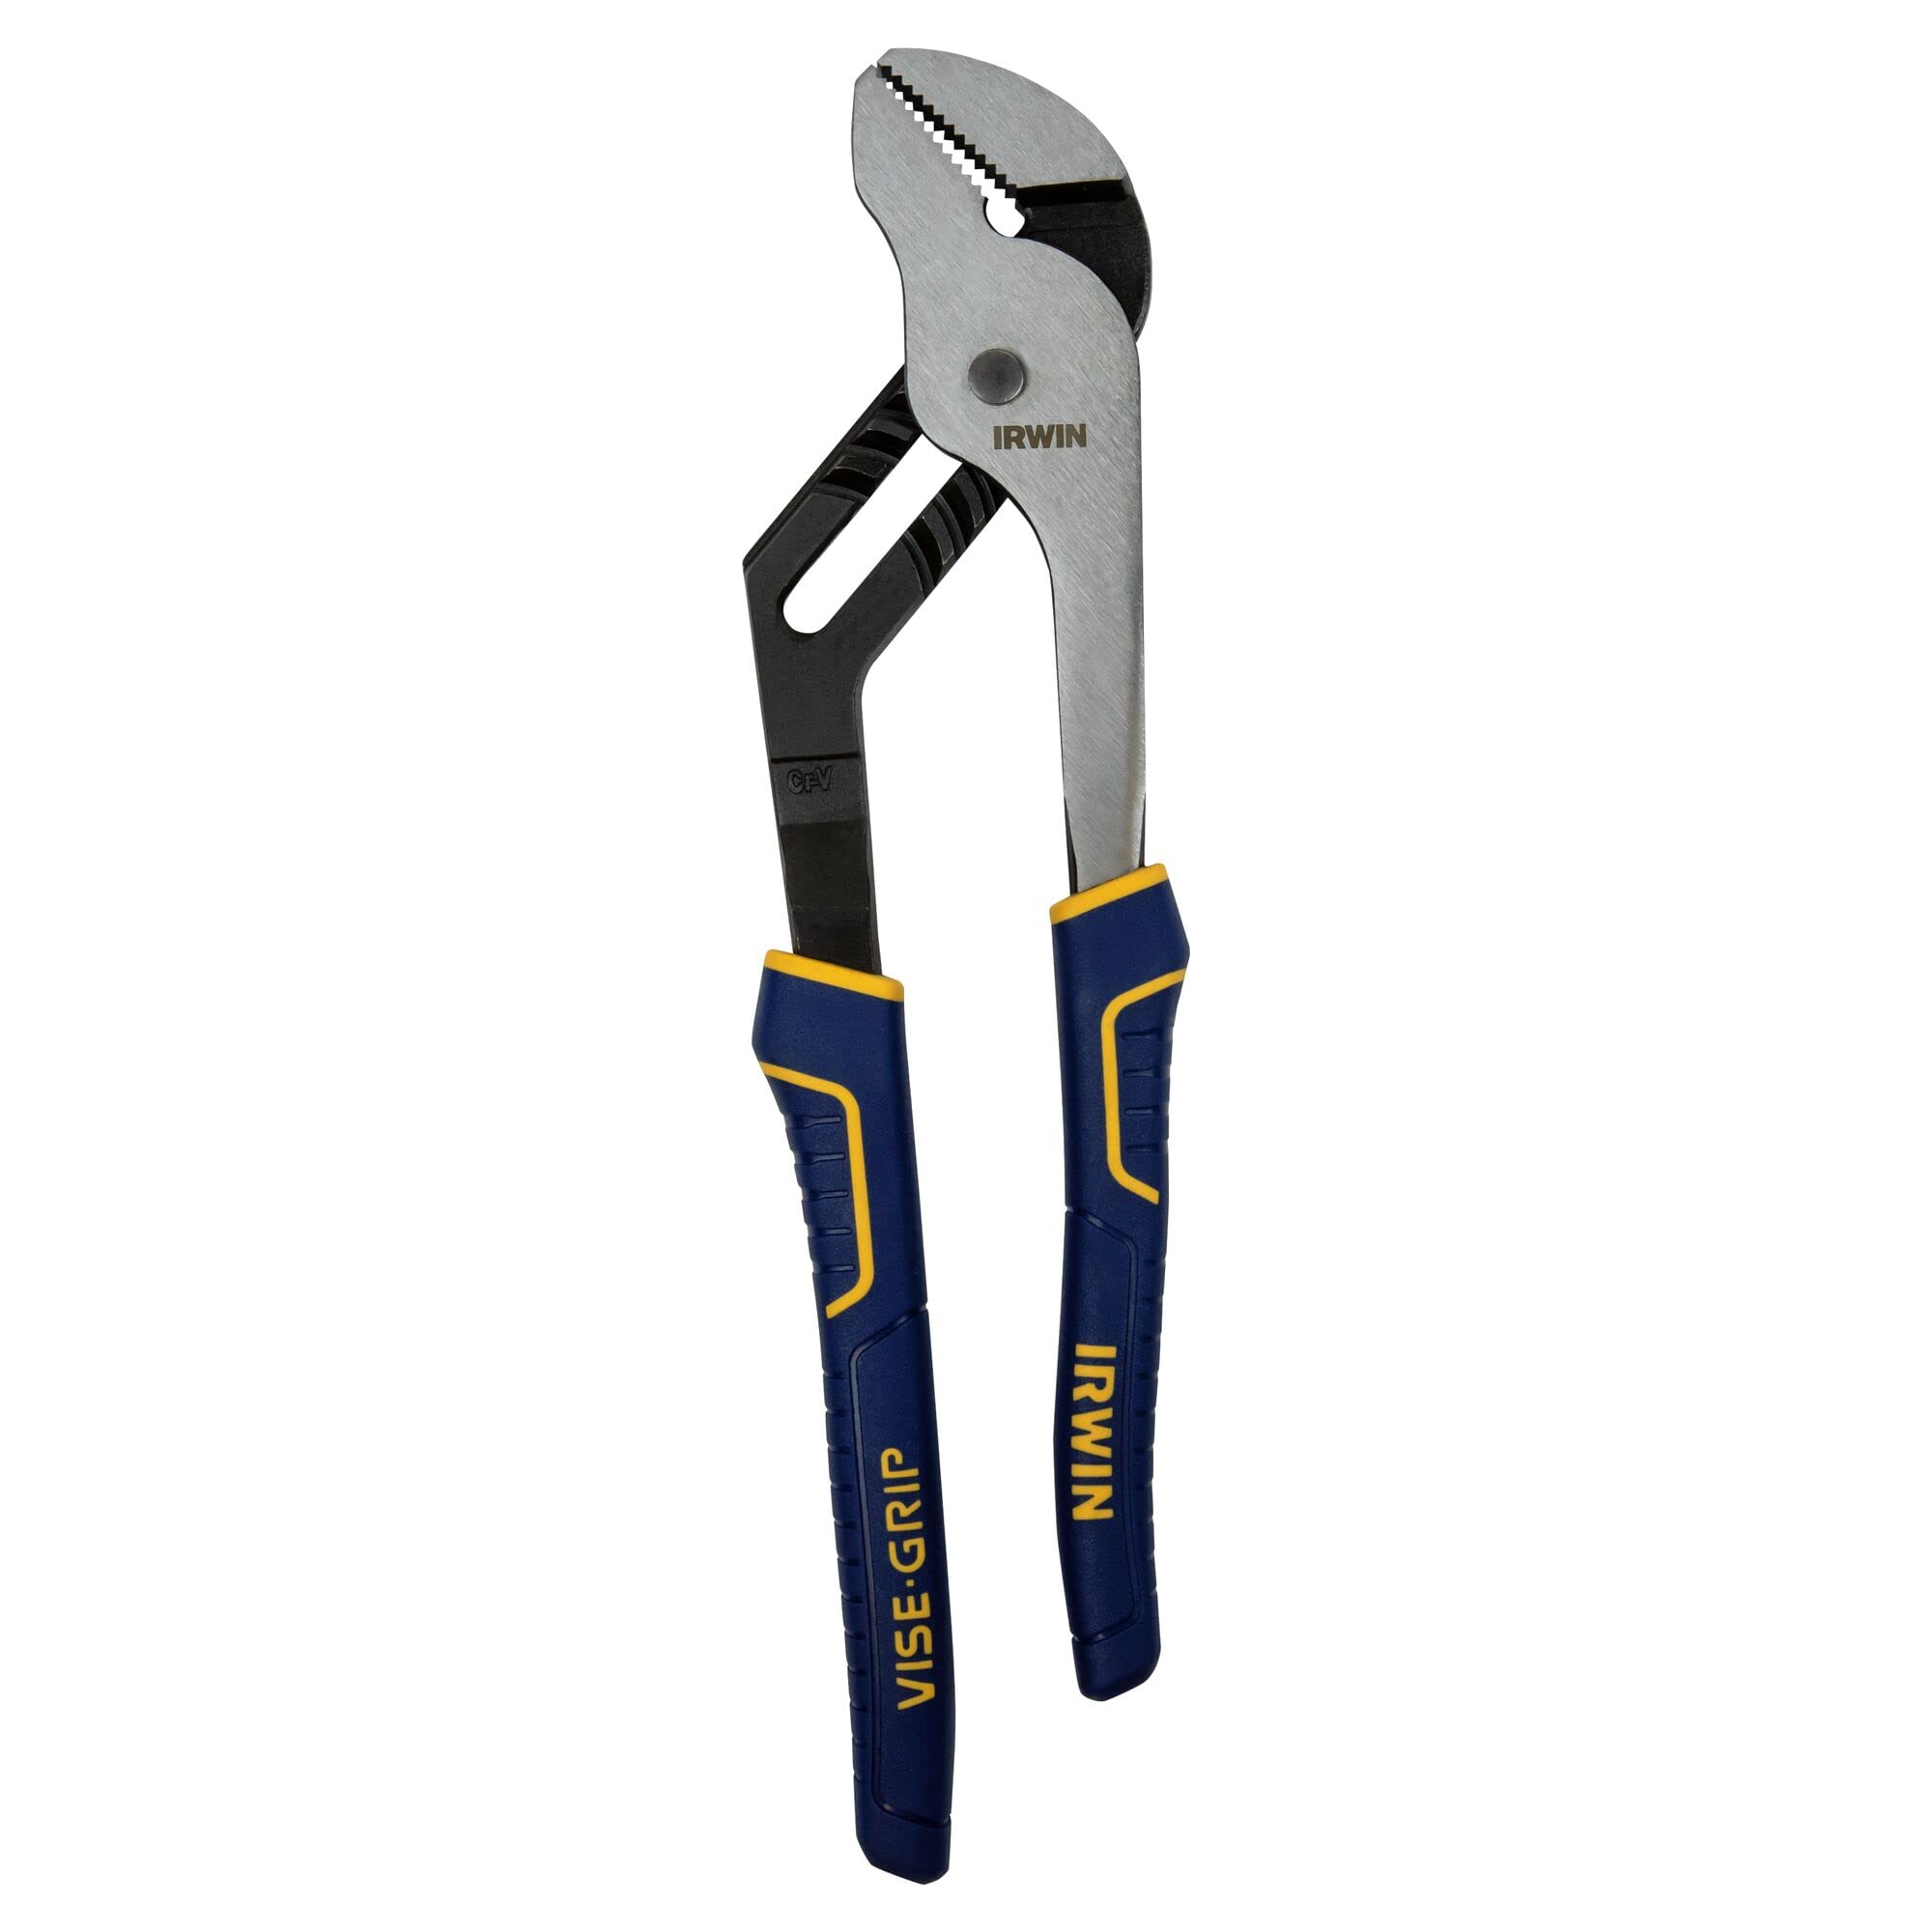 IRWIN GROOVE JOINT PLIERS 8"